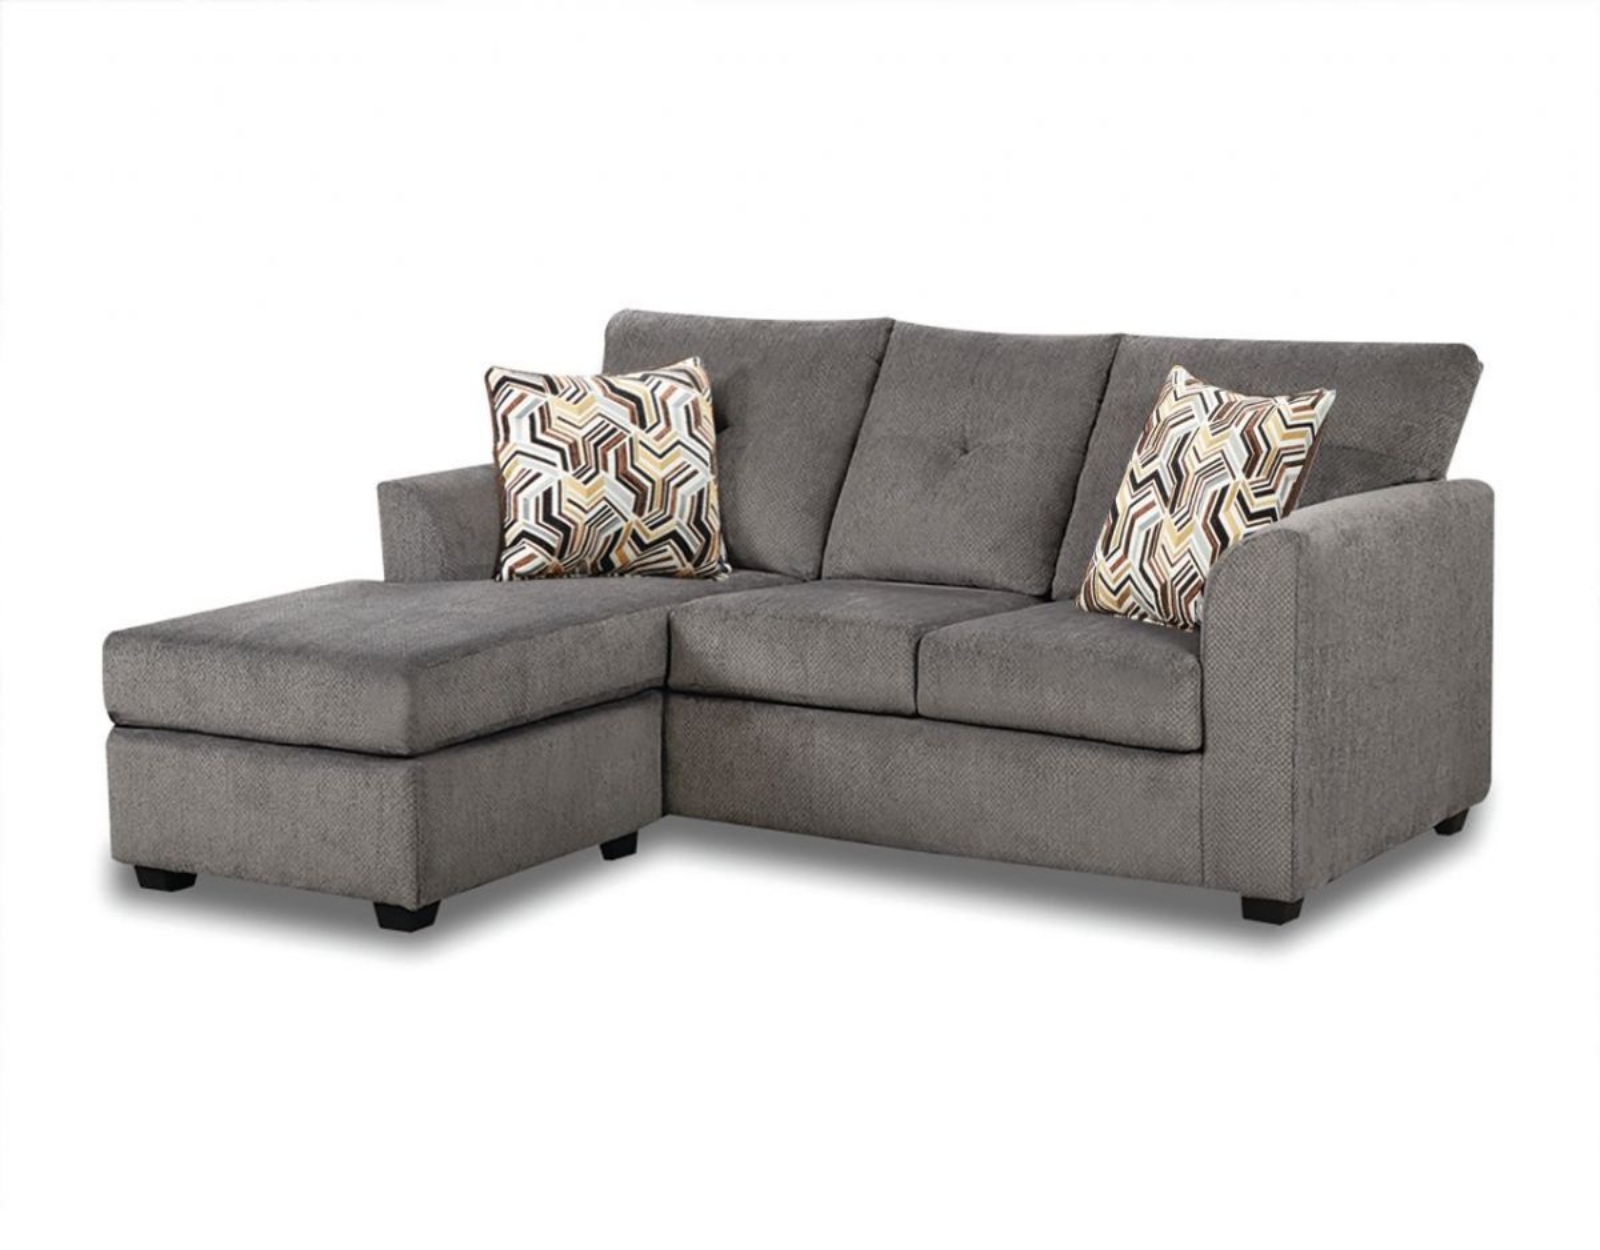 Picture of Kelly Sofa Chaise